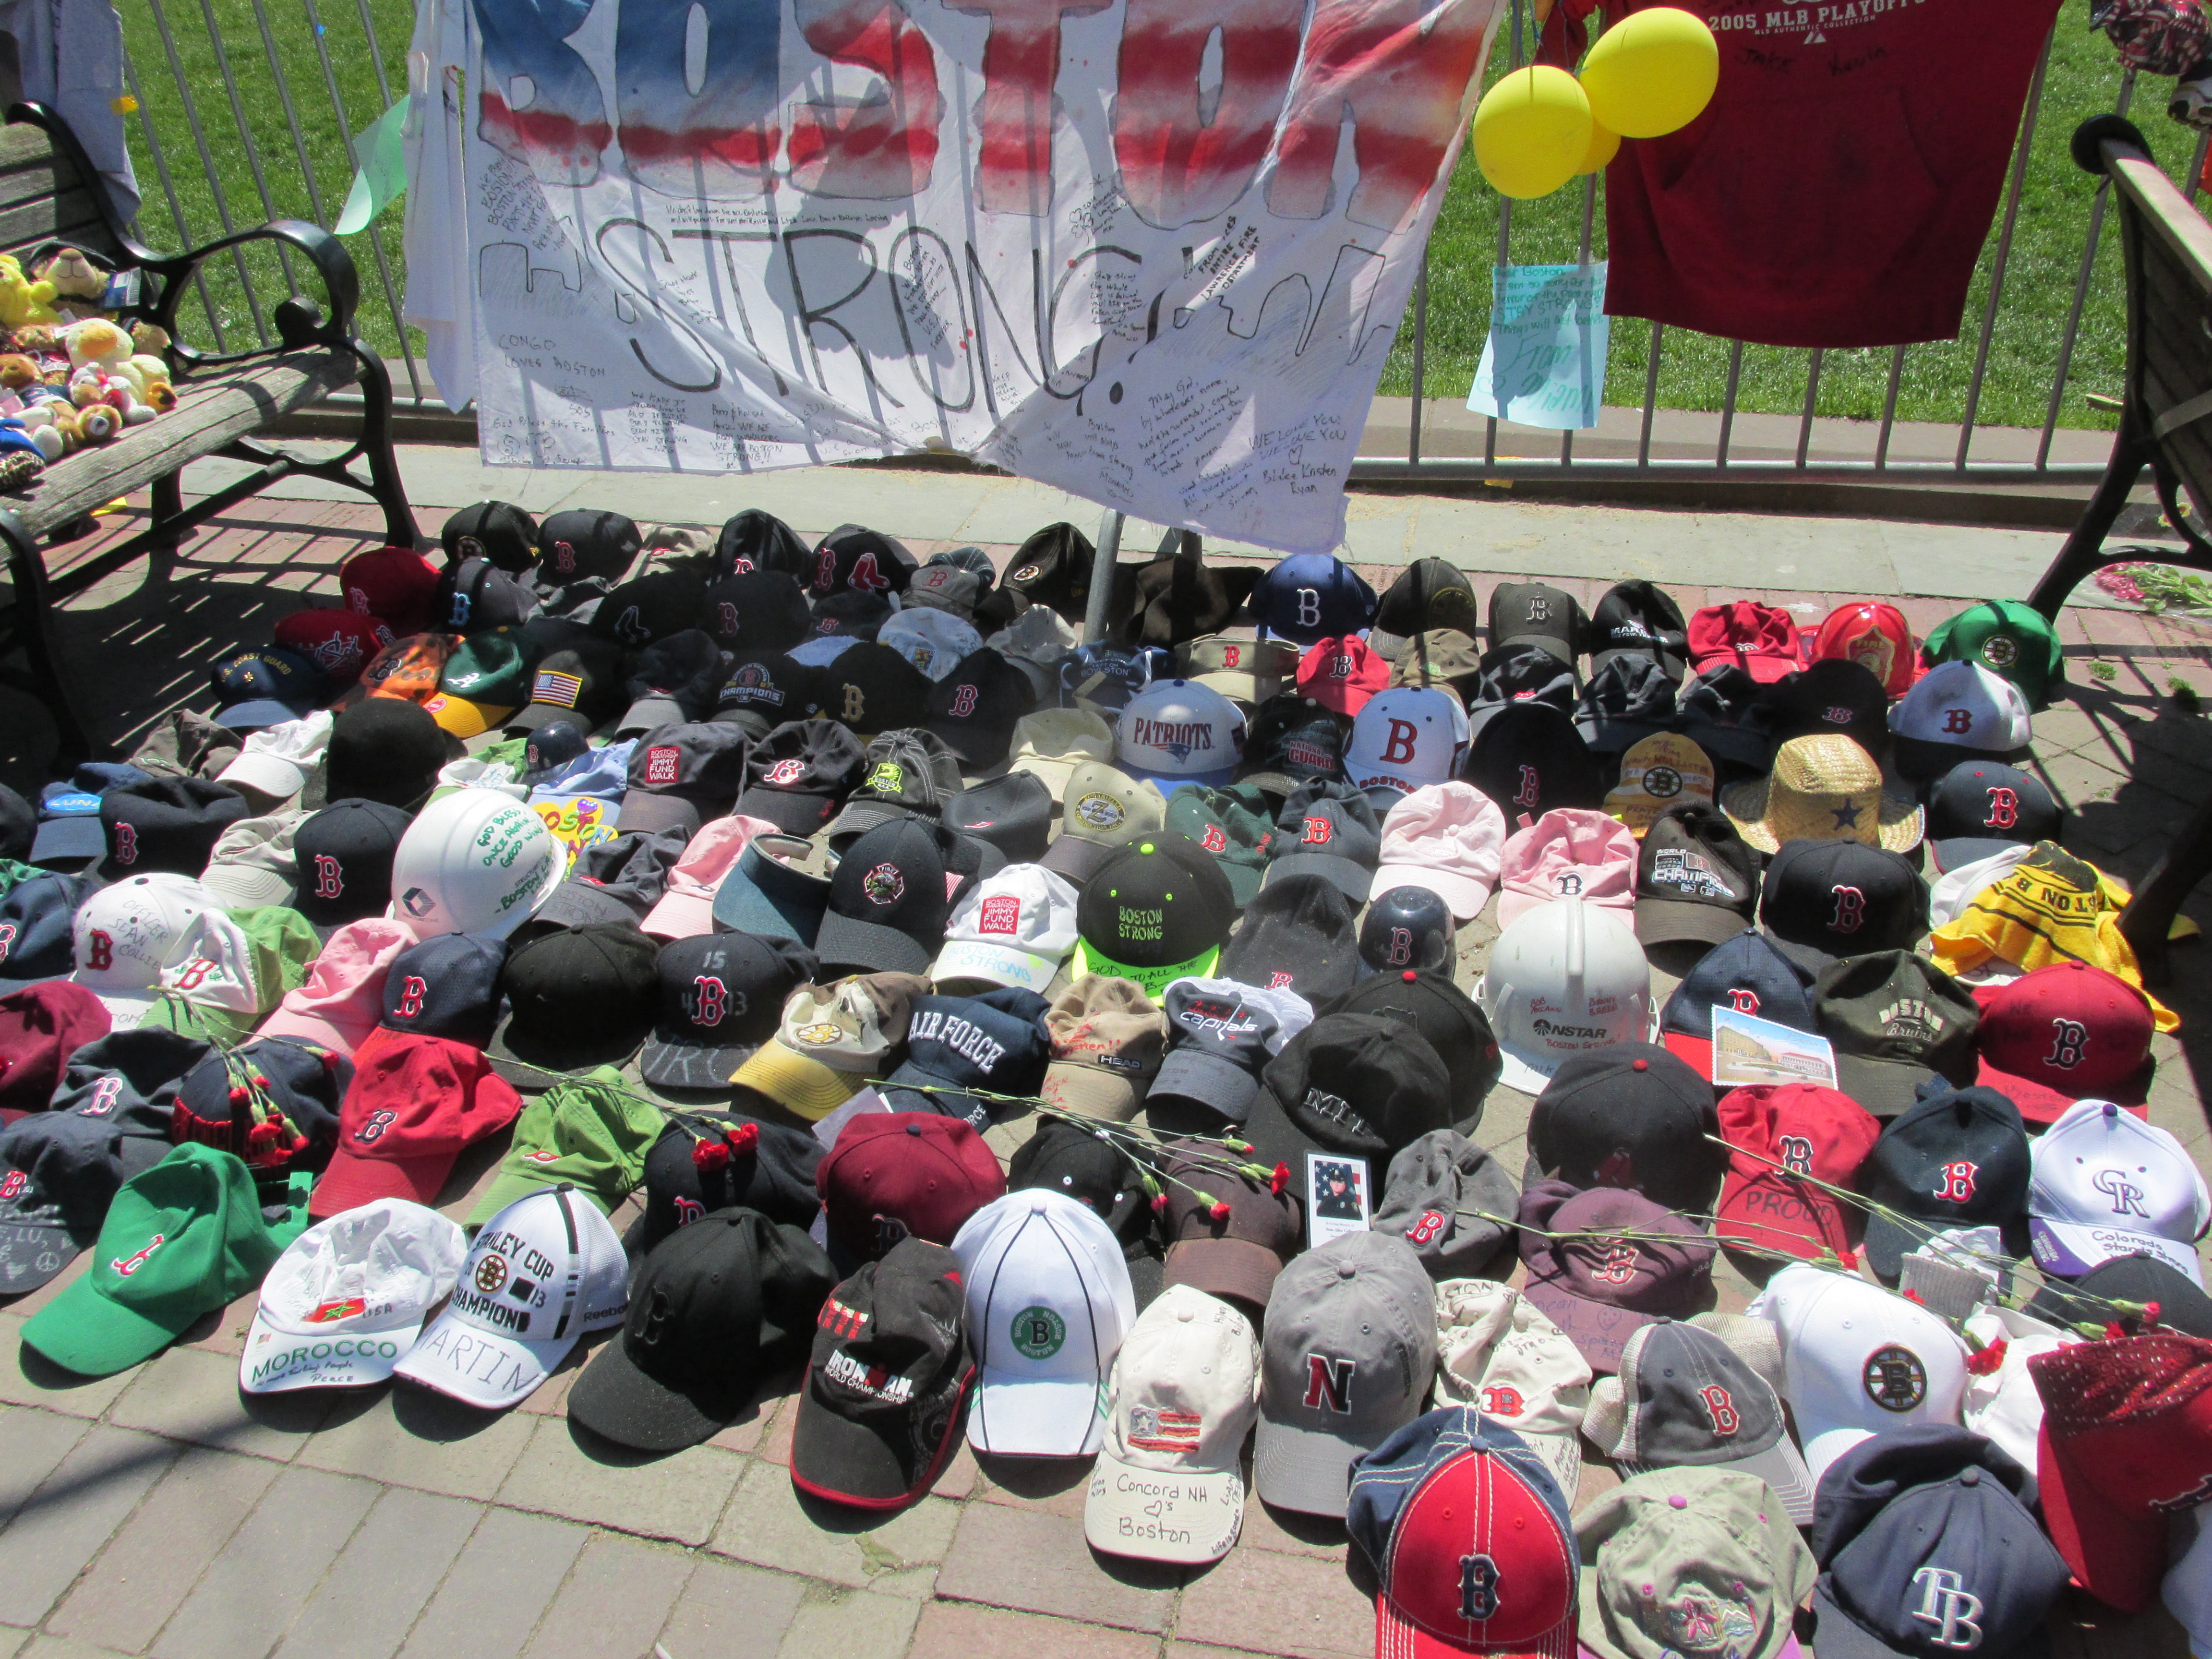 A collection of hats mark another part of the memorial.